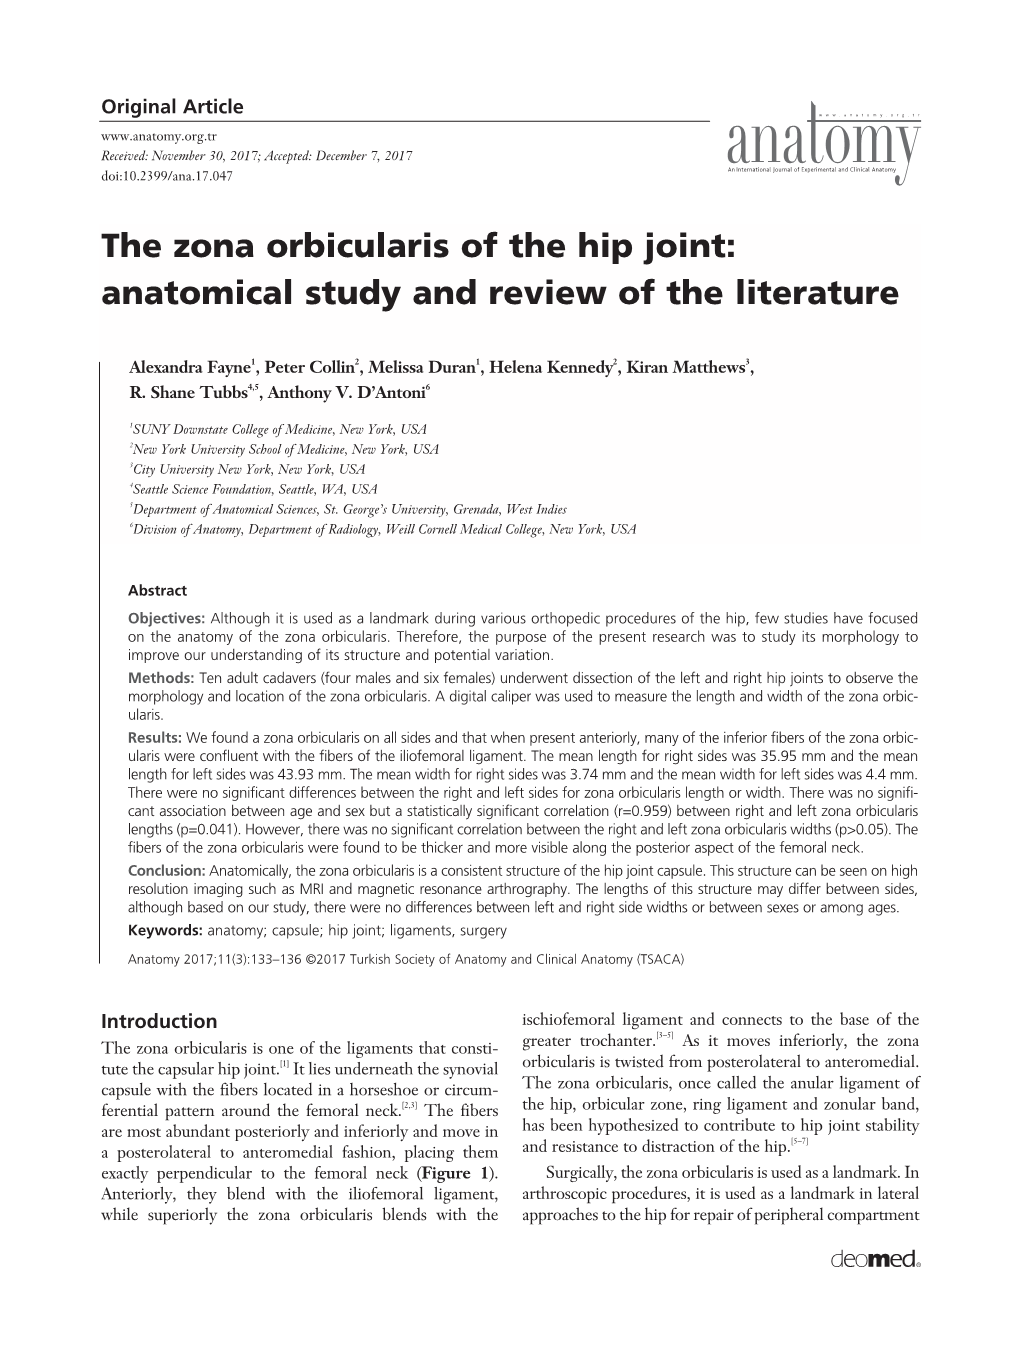 The Zona Orbicularis of the Hip Joint: Anatomical Study and Review of the Literature